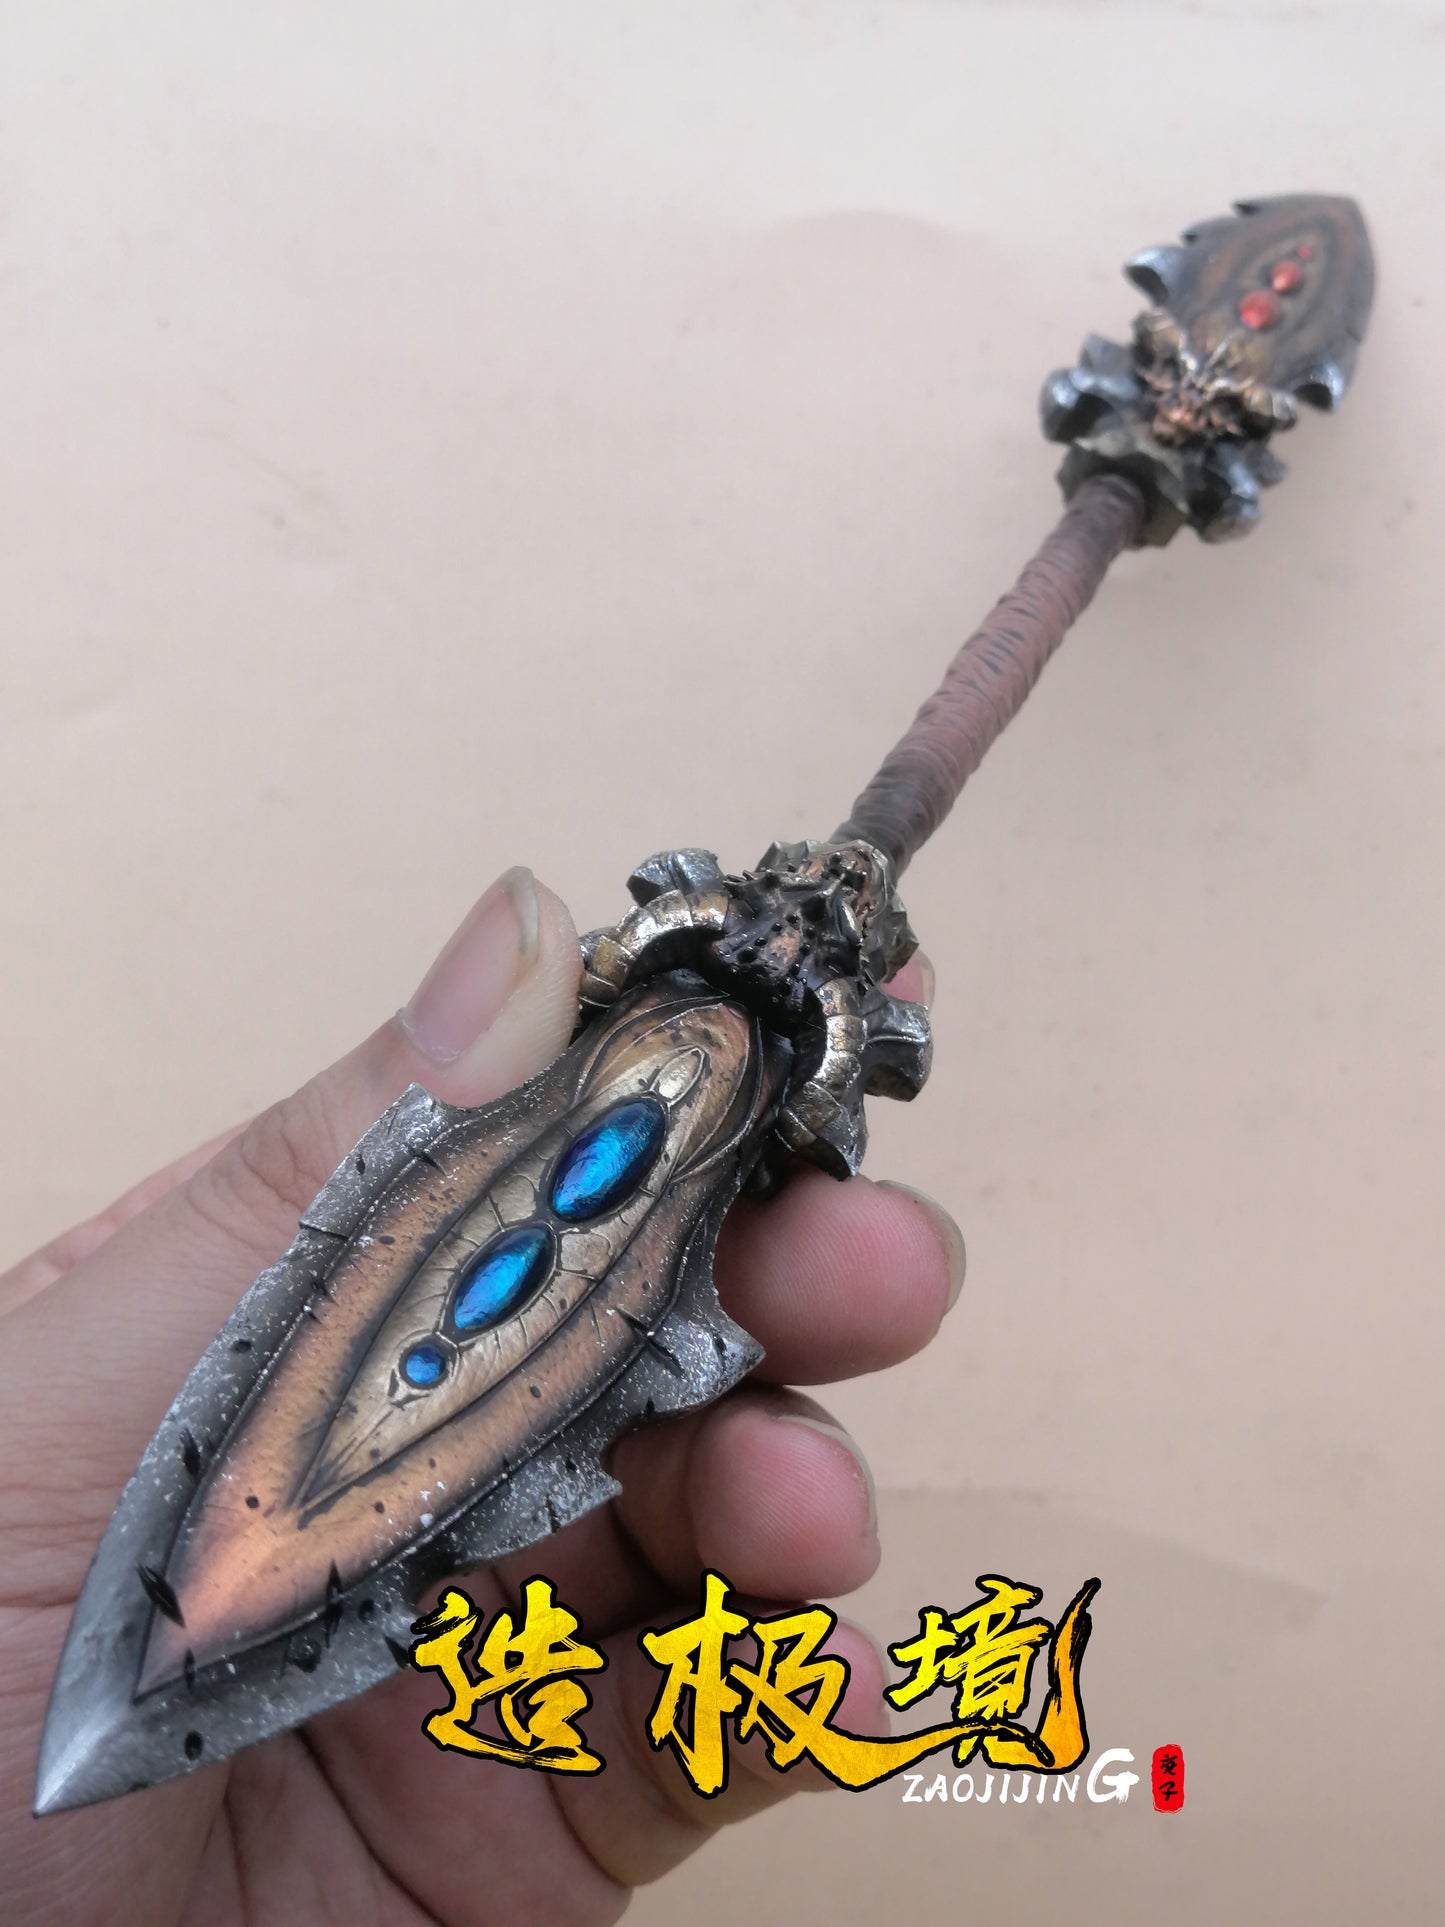 Weapon - Keel double blade